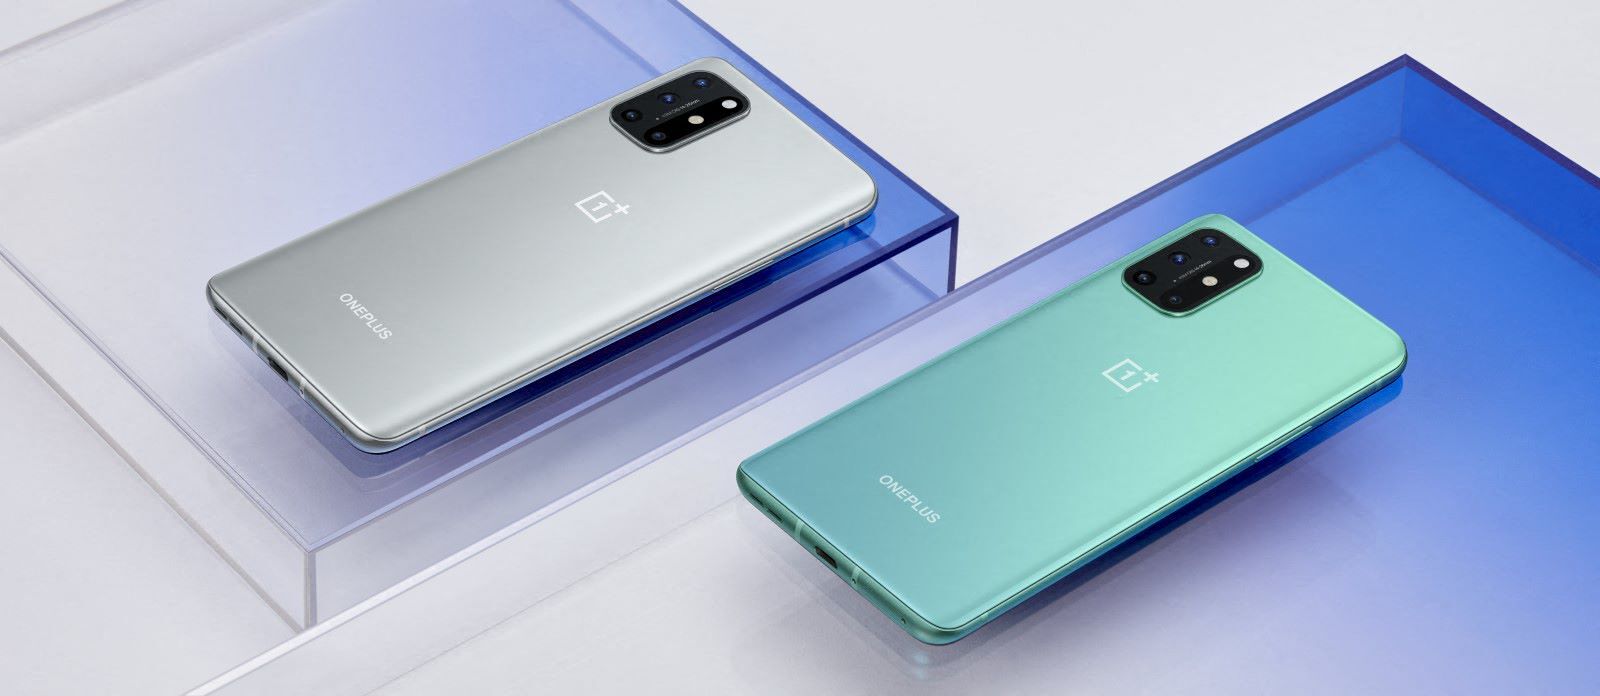 OnePlus 8T comes in two colors, Lunar Silver (left) and Aquamarine Green (right) - The OnePlus 8T arrives with two batteries, a 120Hz flat display, and 65W fast charging